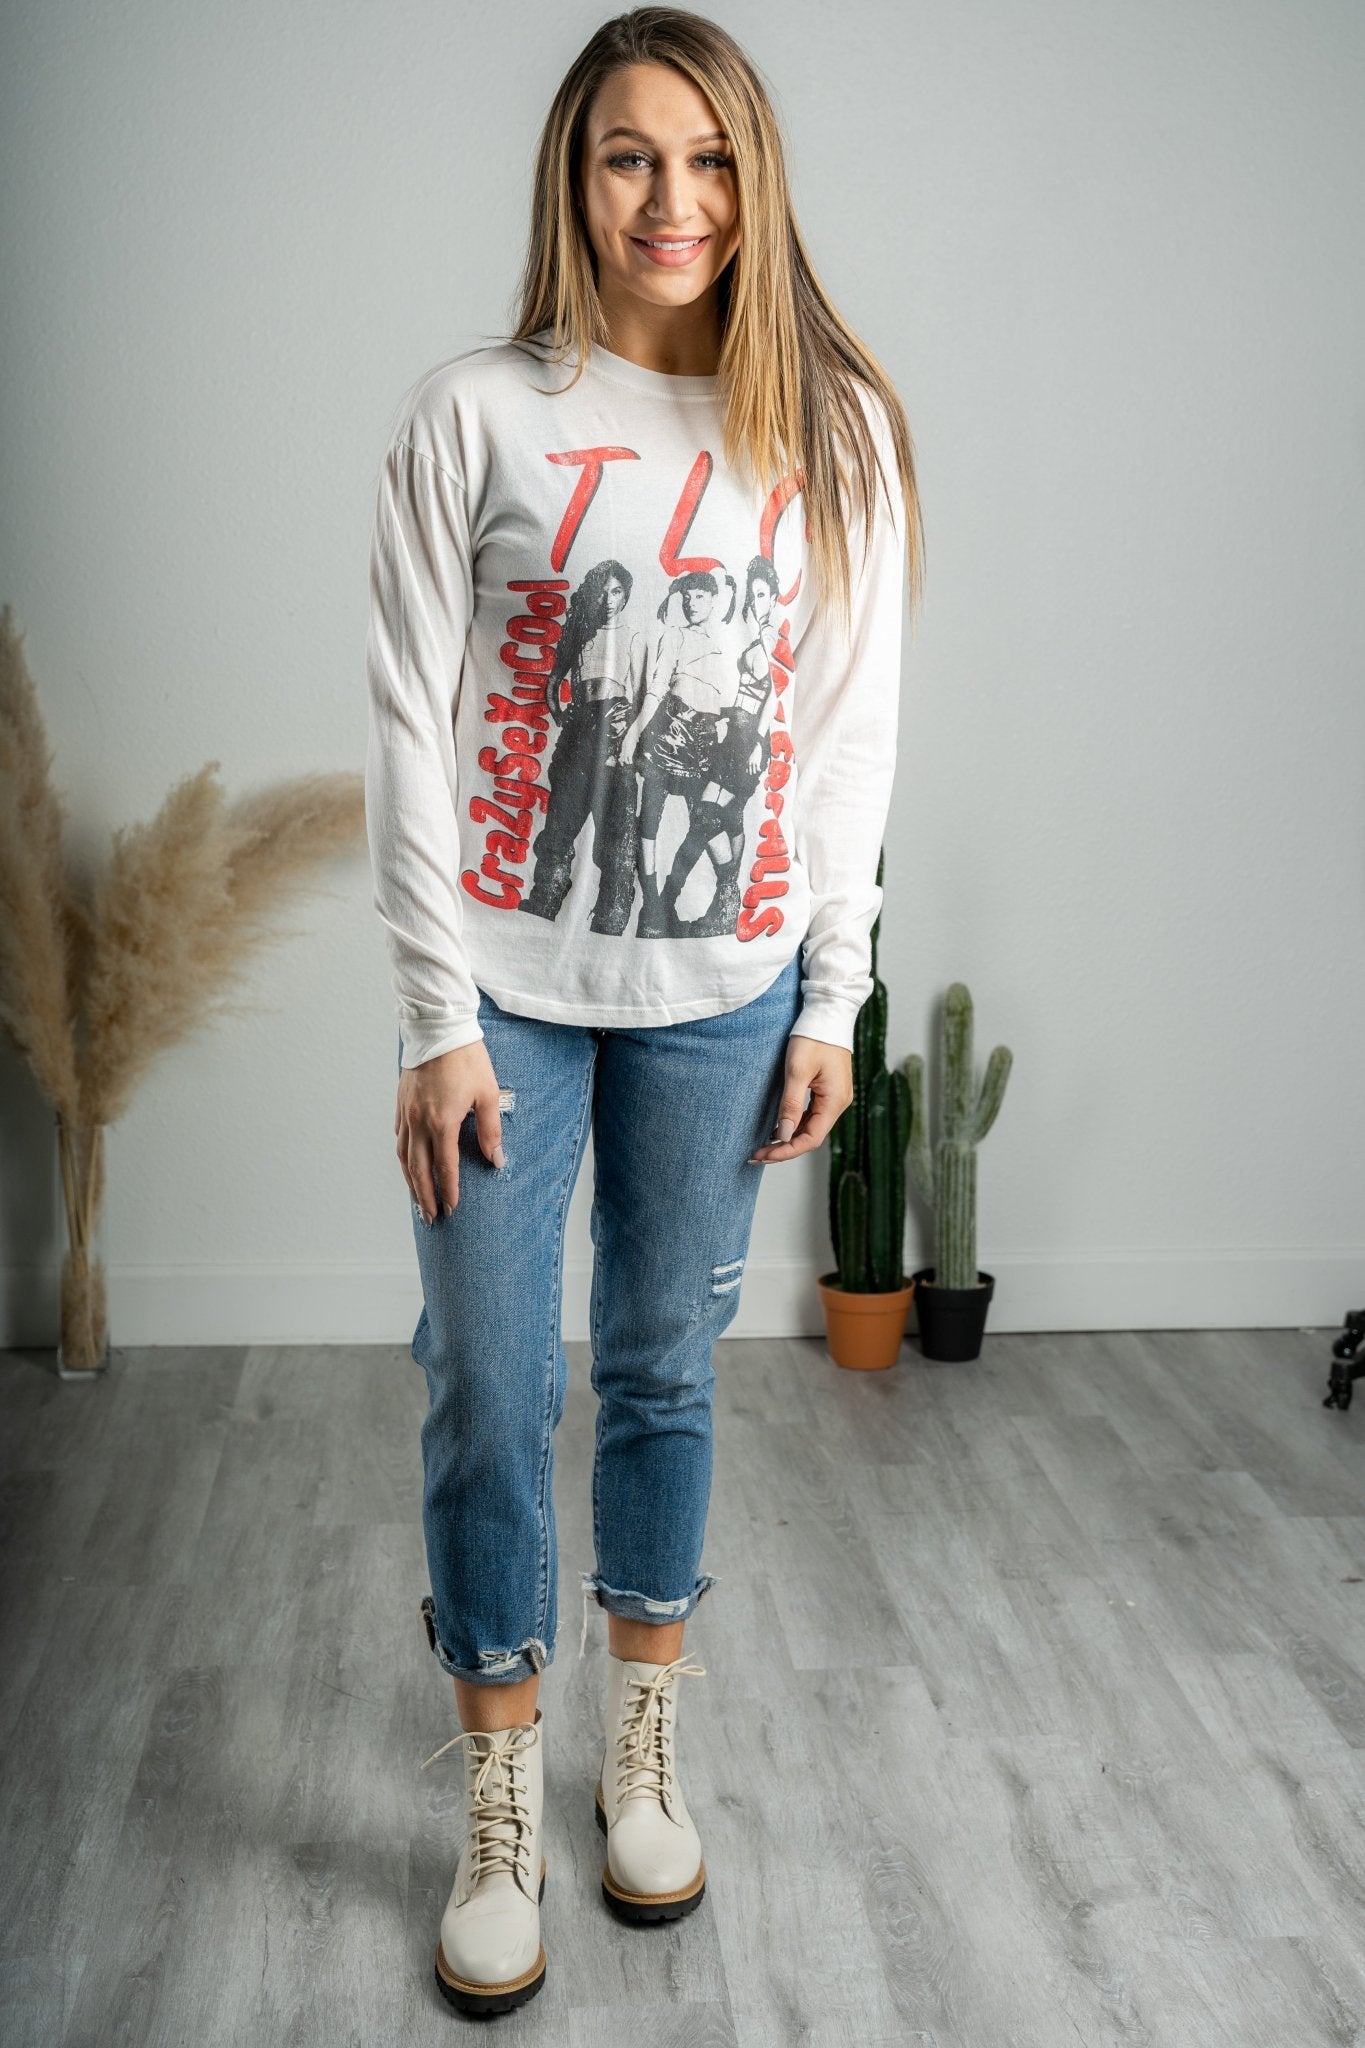 DayDreamer TLC waterfalls long sleeve tee vintage white - Vintage Band T-Shirts and Sweatshirts at Lush Fashion Lounge Boutique in Oklahoma City